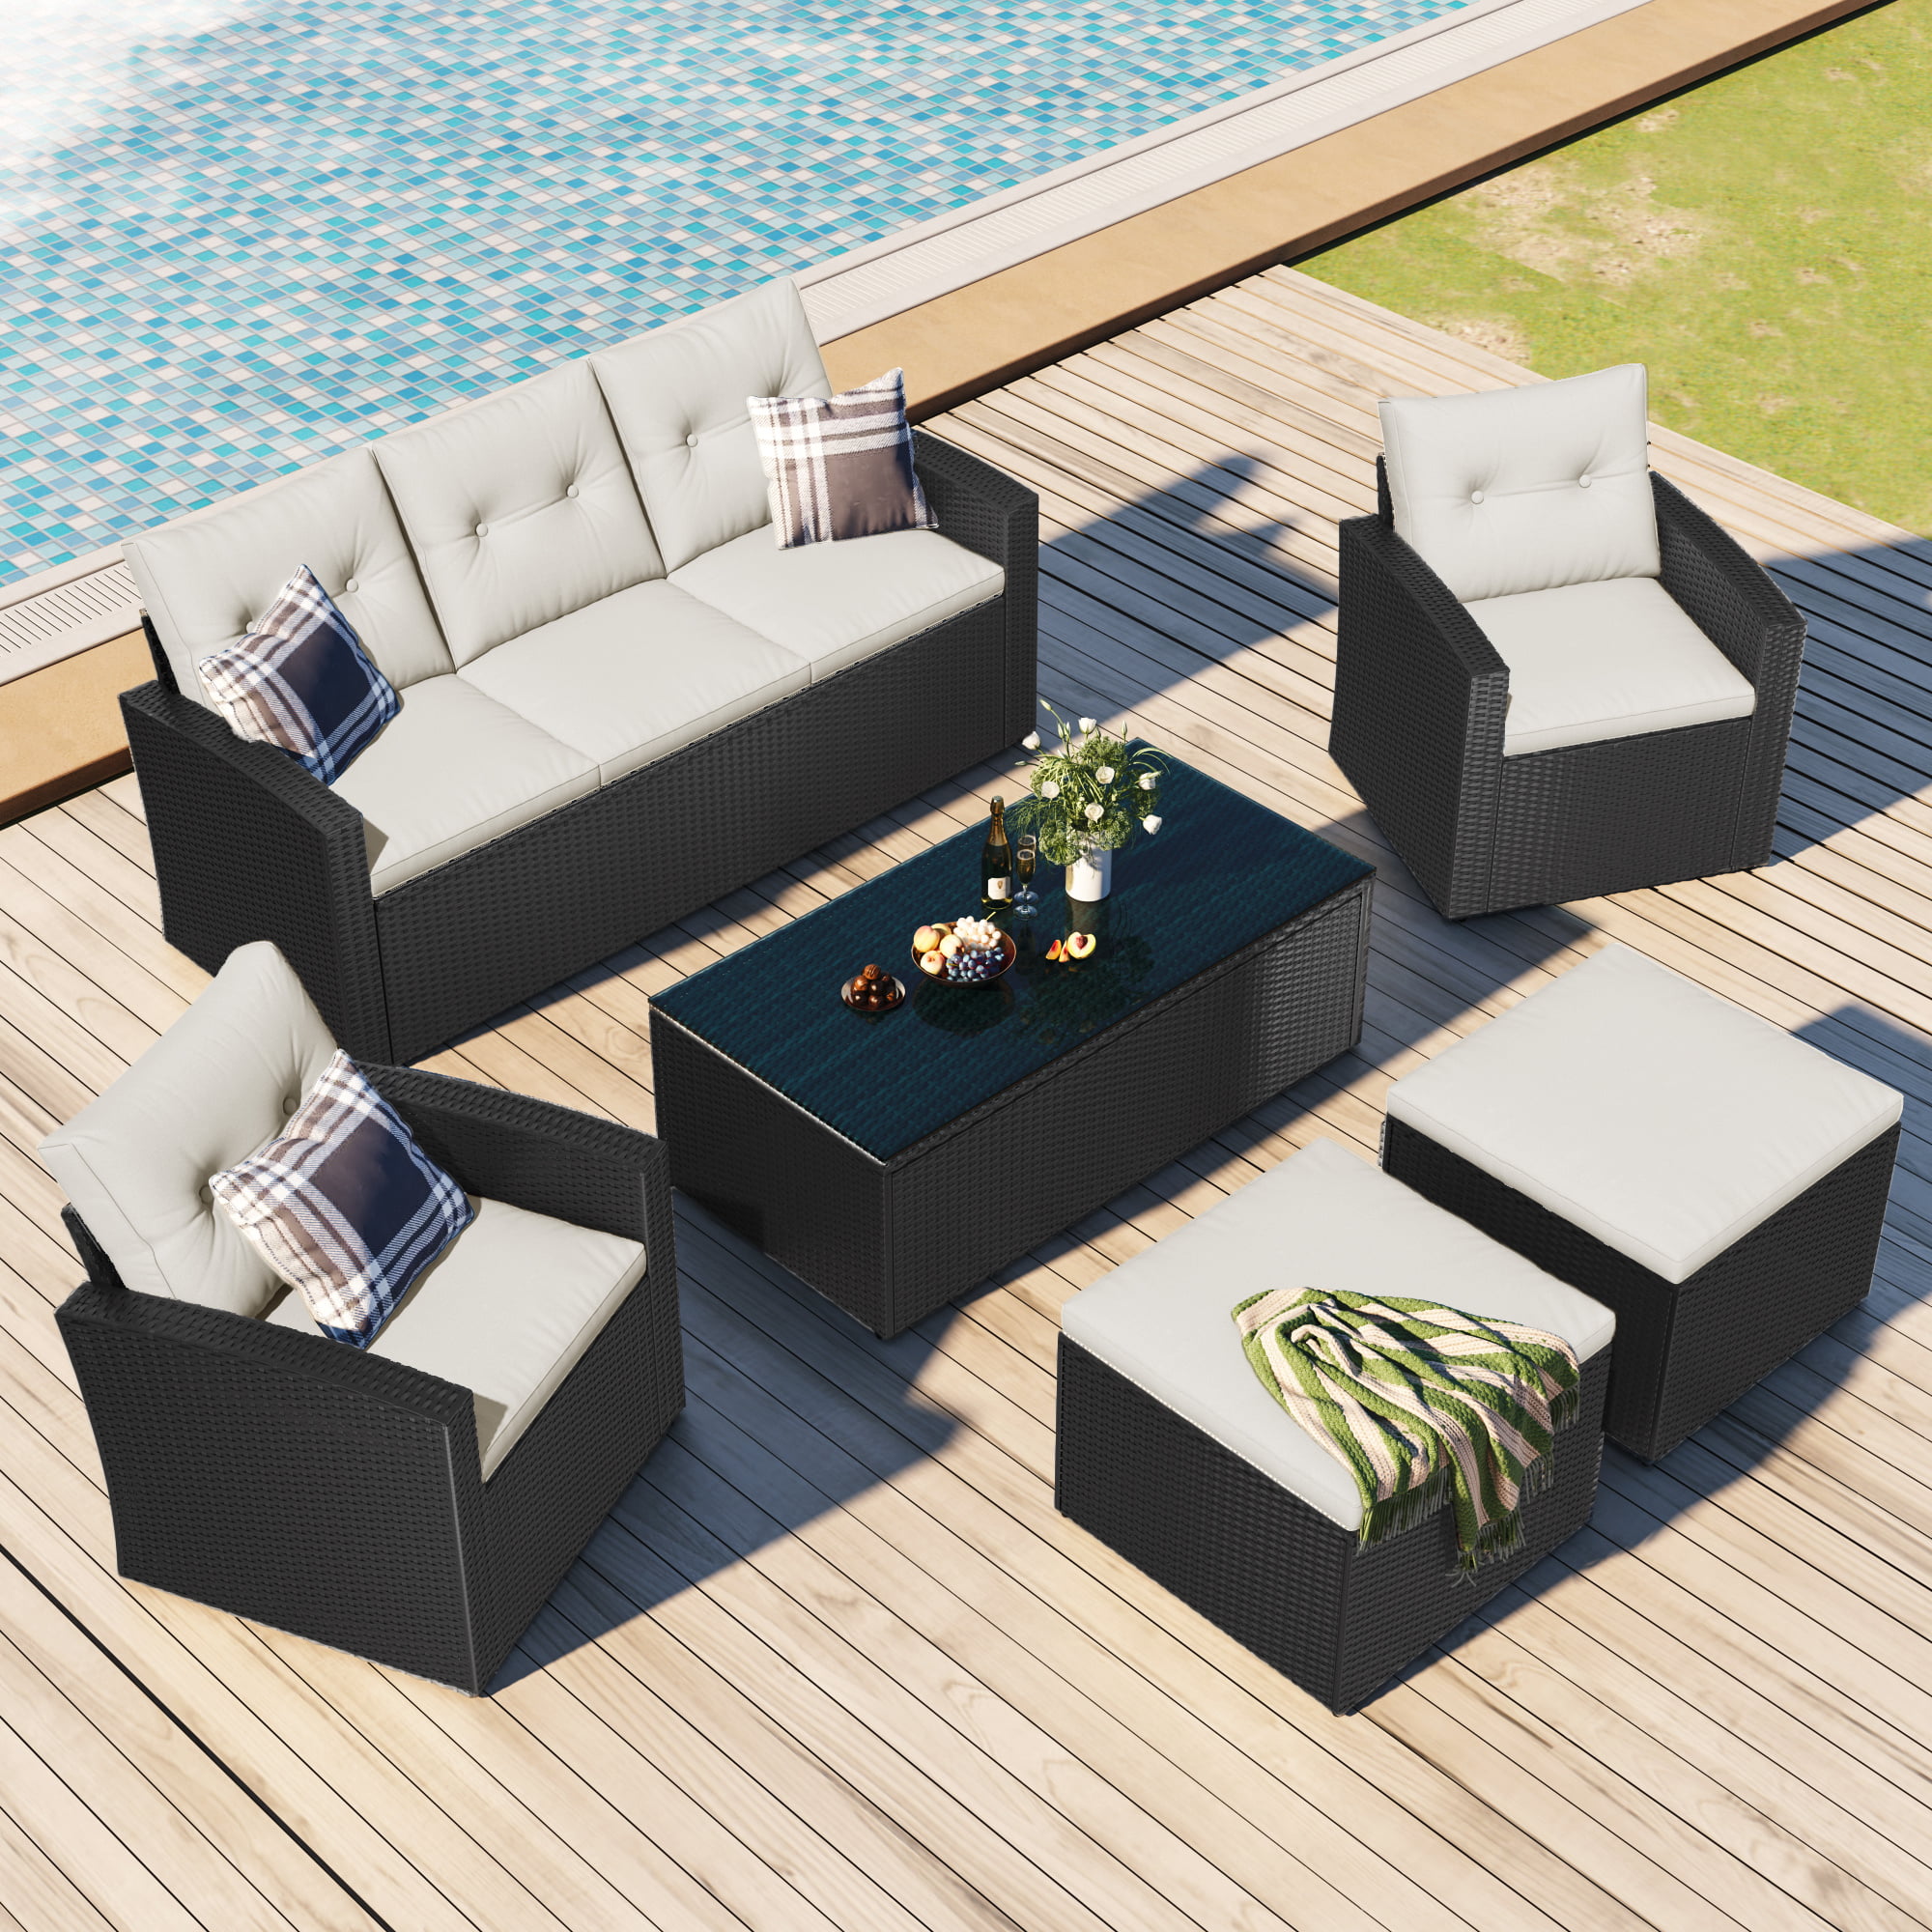 Black Wicker Patio Ottoman Sectional Outdoor Foot Stool Sofa Couch Furniture 